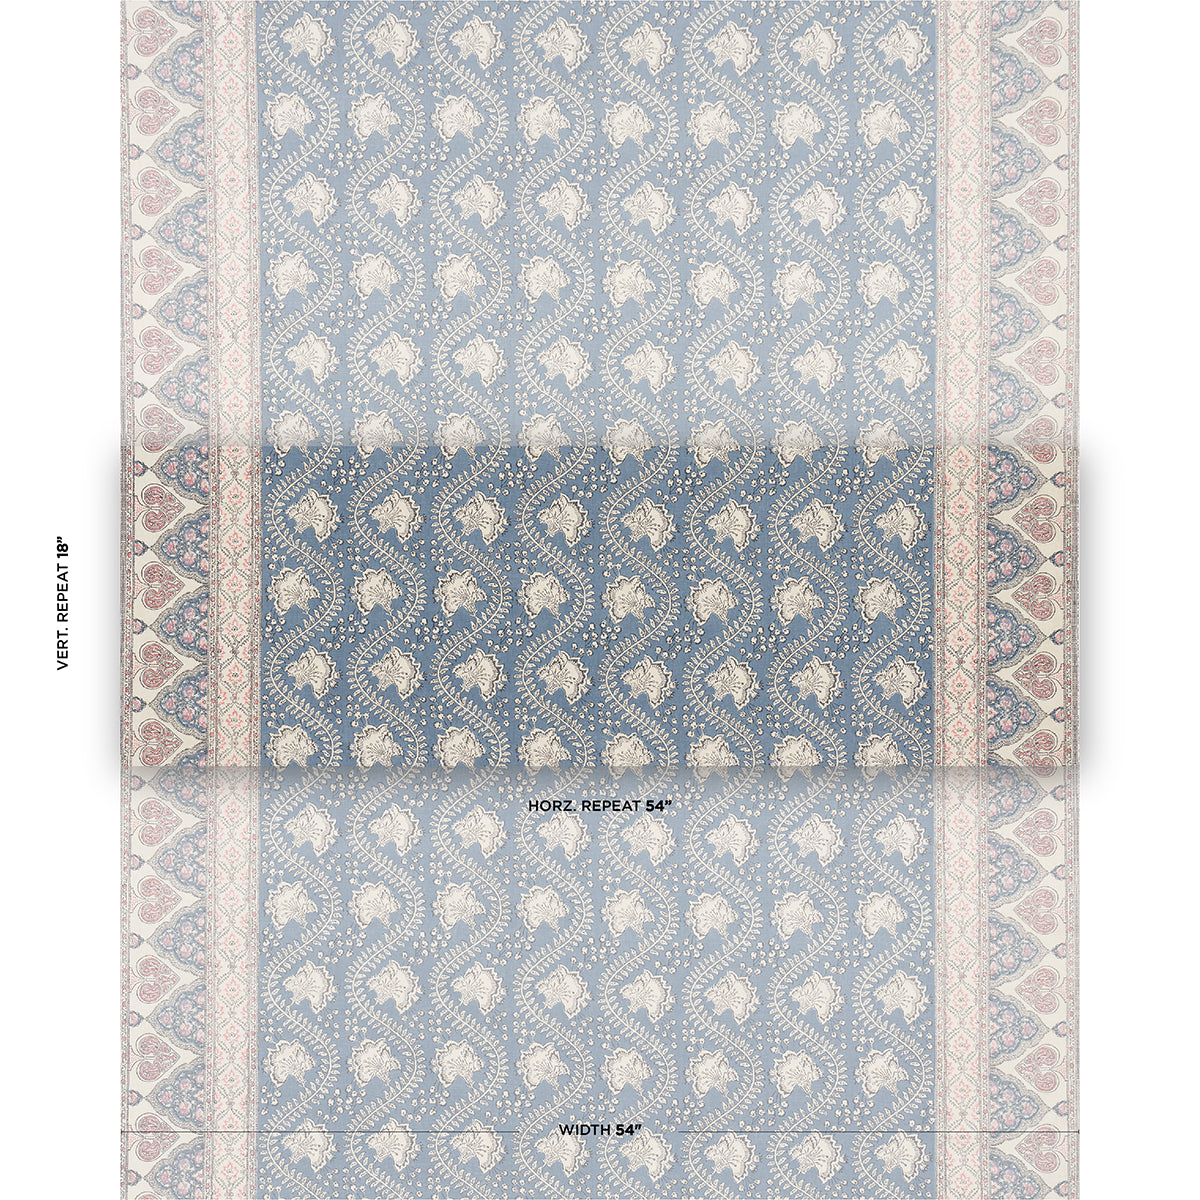 Purchase 181340 | Tombay, Delft - Schumacher Fabric